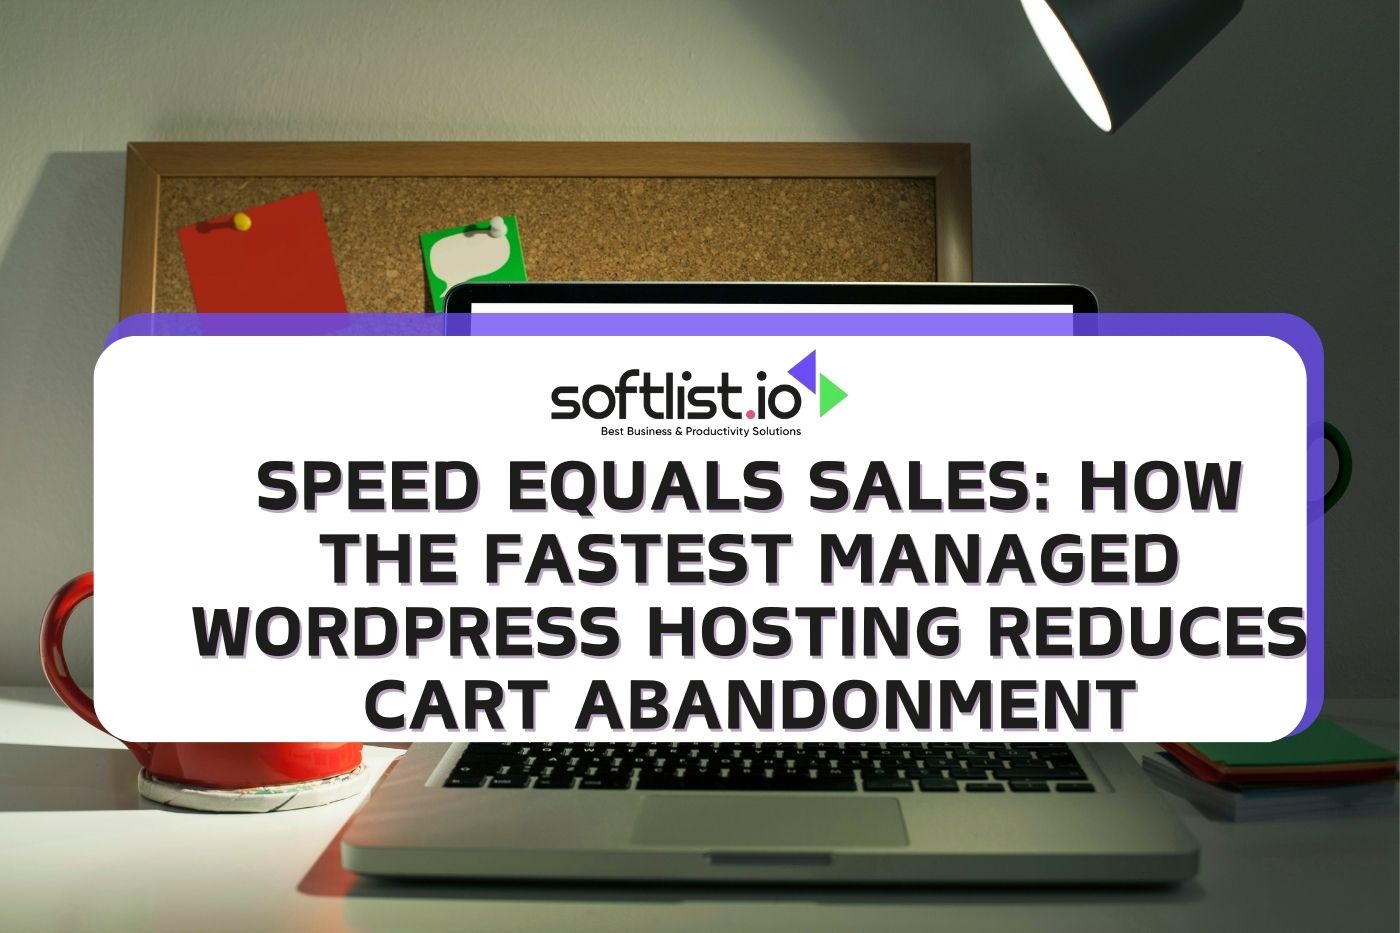 Speed Equals Sales: How the Fastest Managed WordPress Hosting Reduces Cart Abandonment